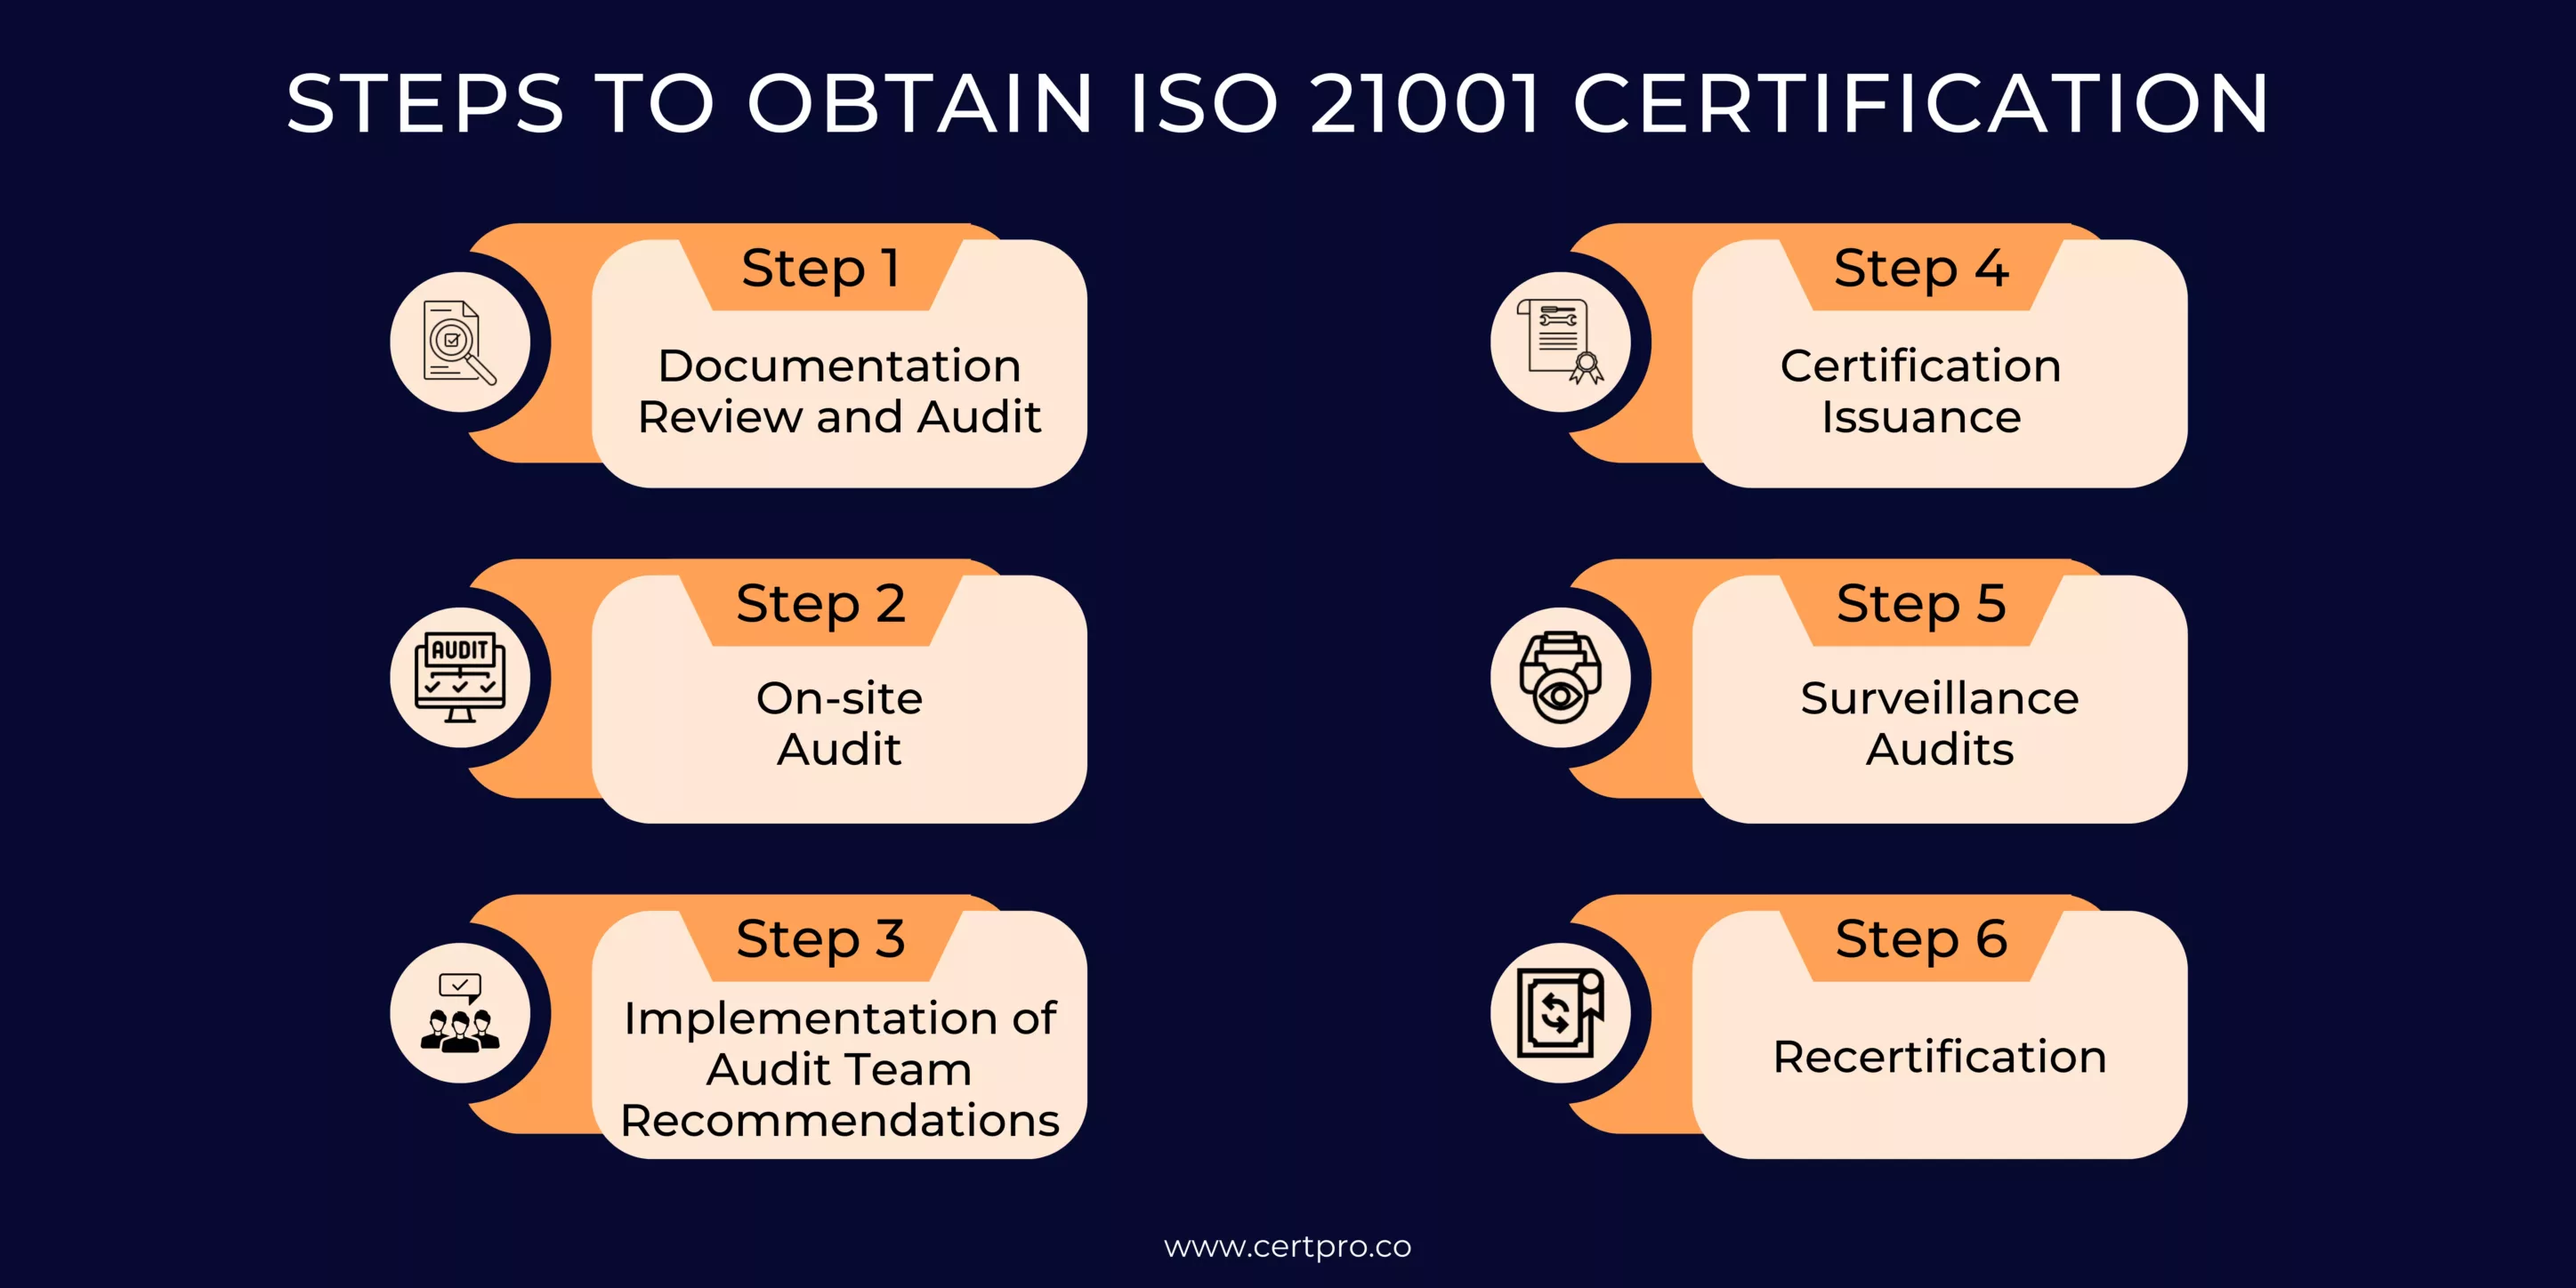 STEPS TO OBTAIN ISO 21001